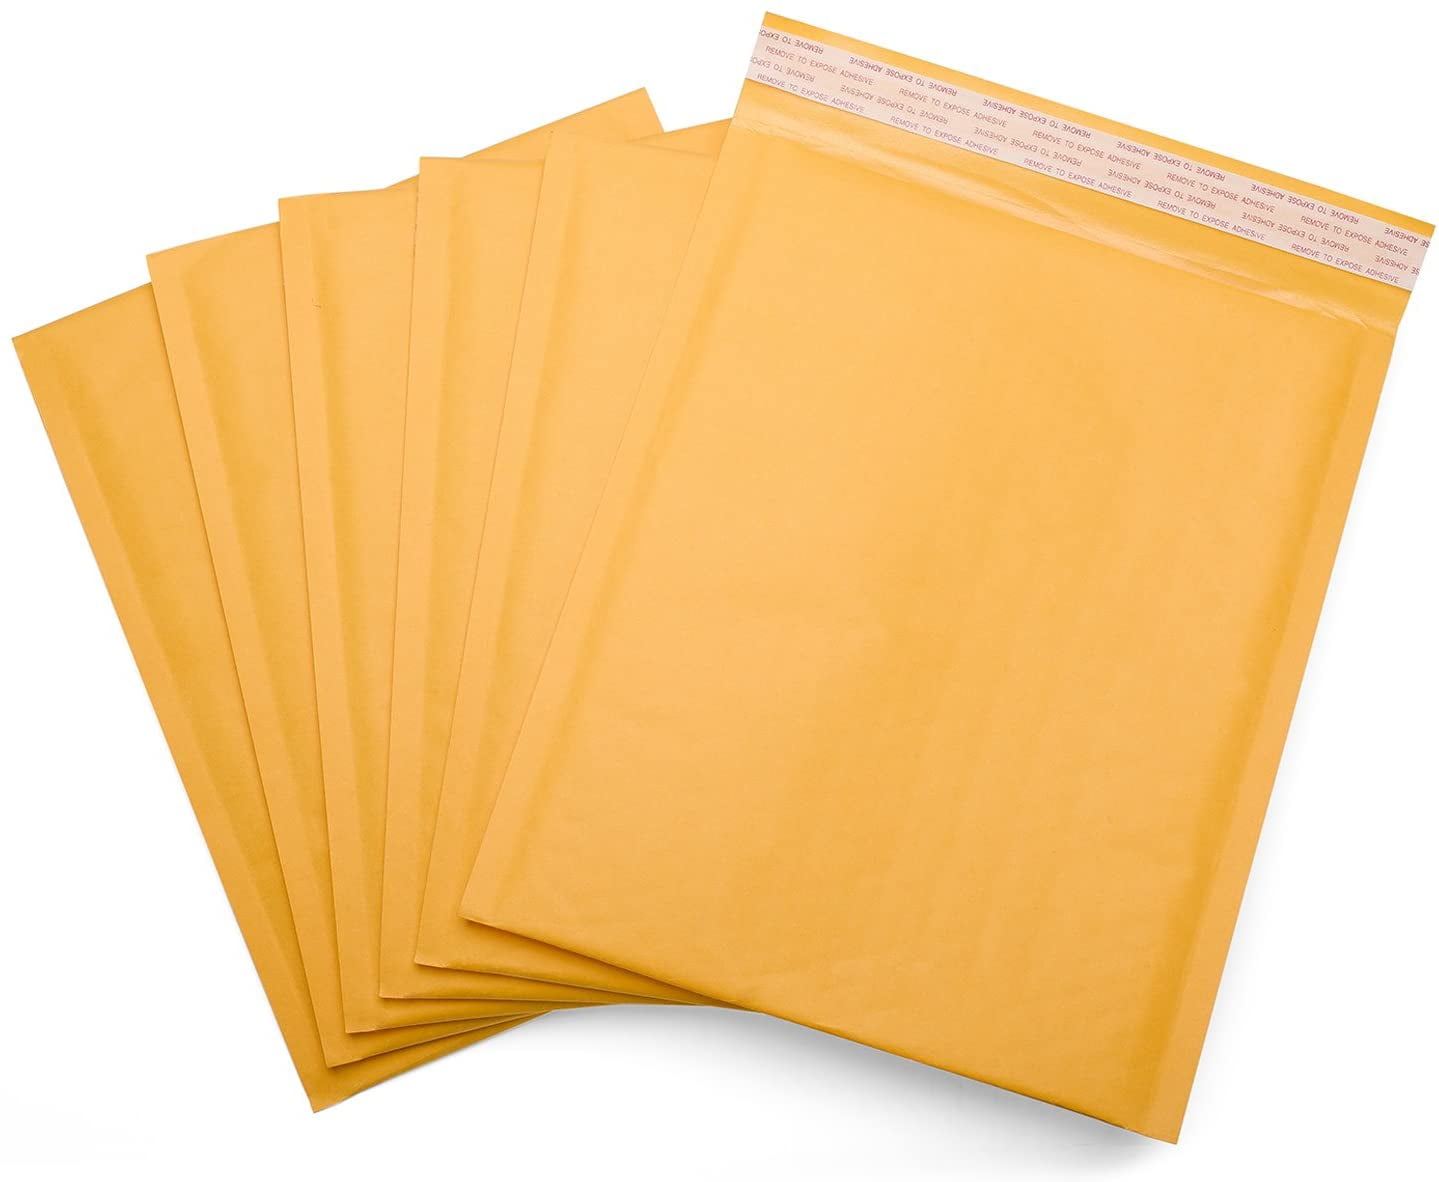 Details about   Kraft Bubble Mailer Padded Envelope Shipping Bag 4x8 Self Sealing 500 Pieces 